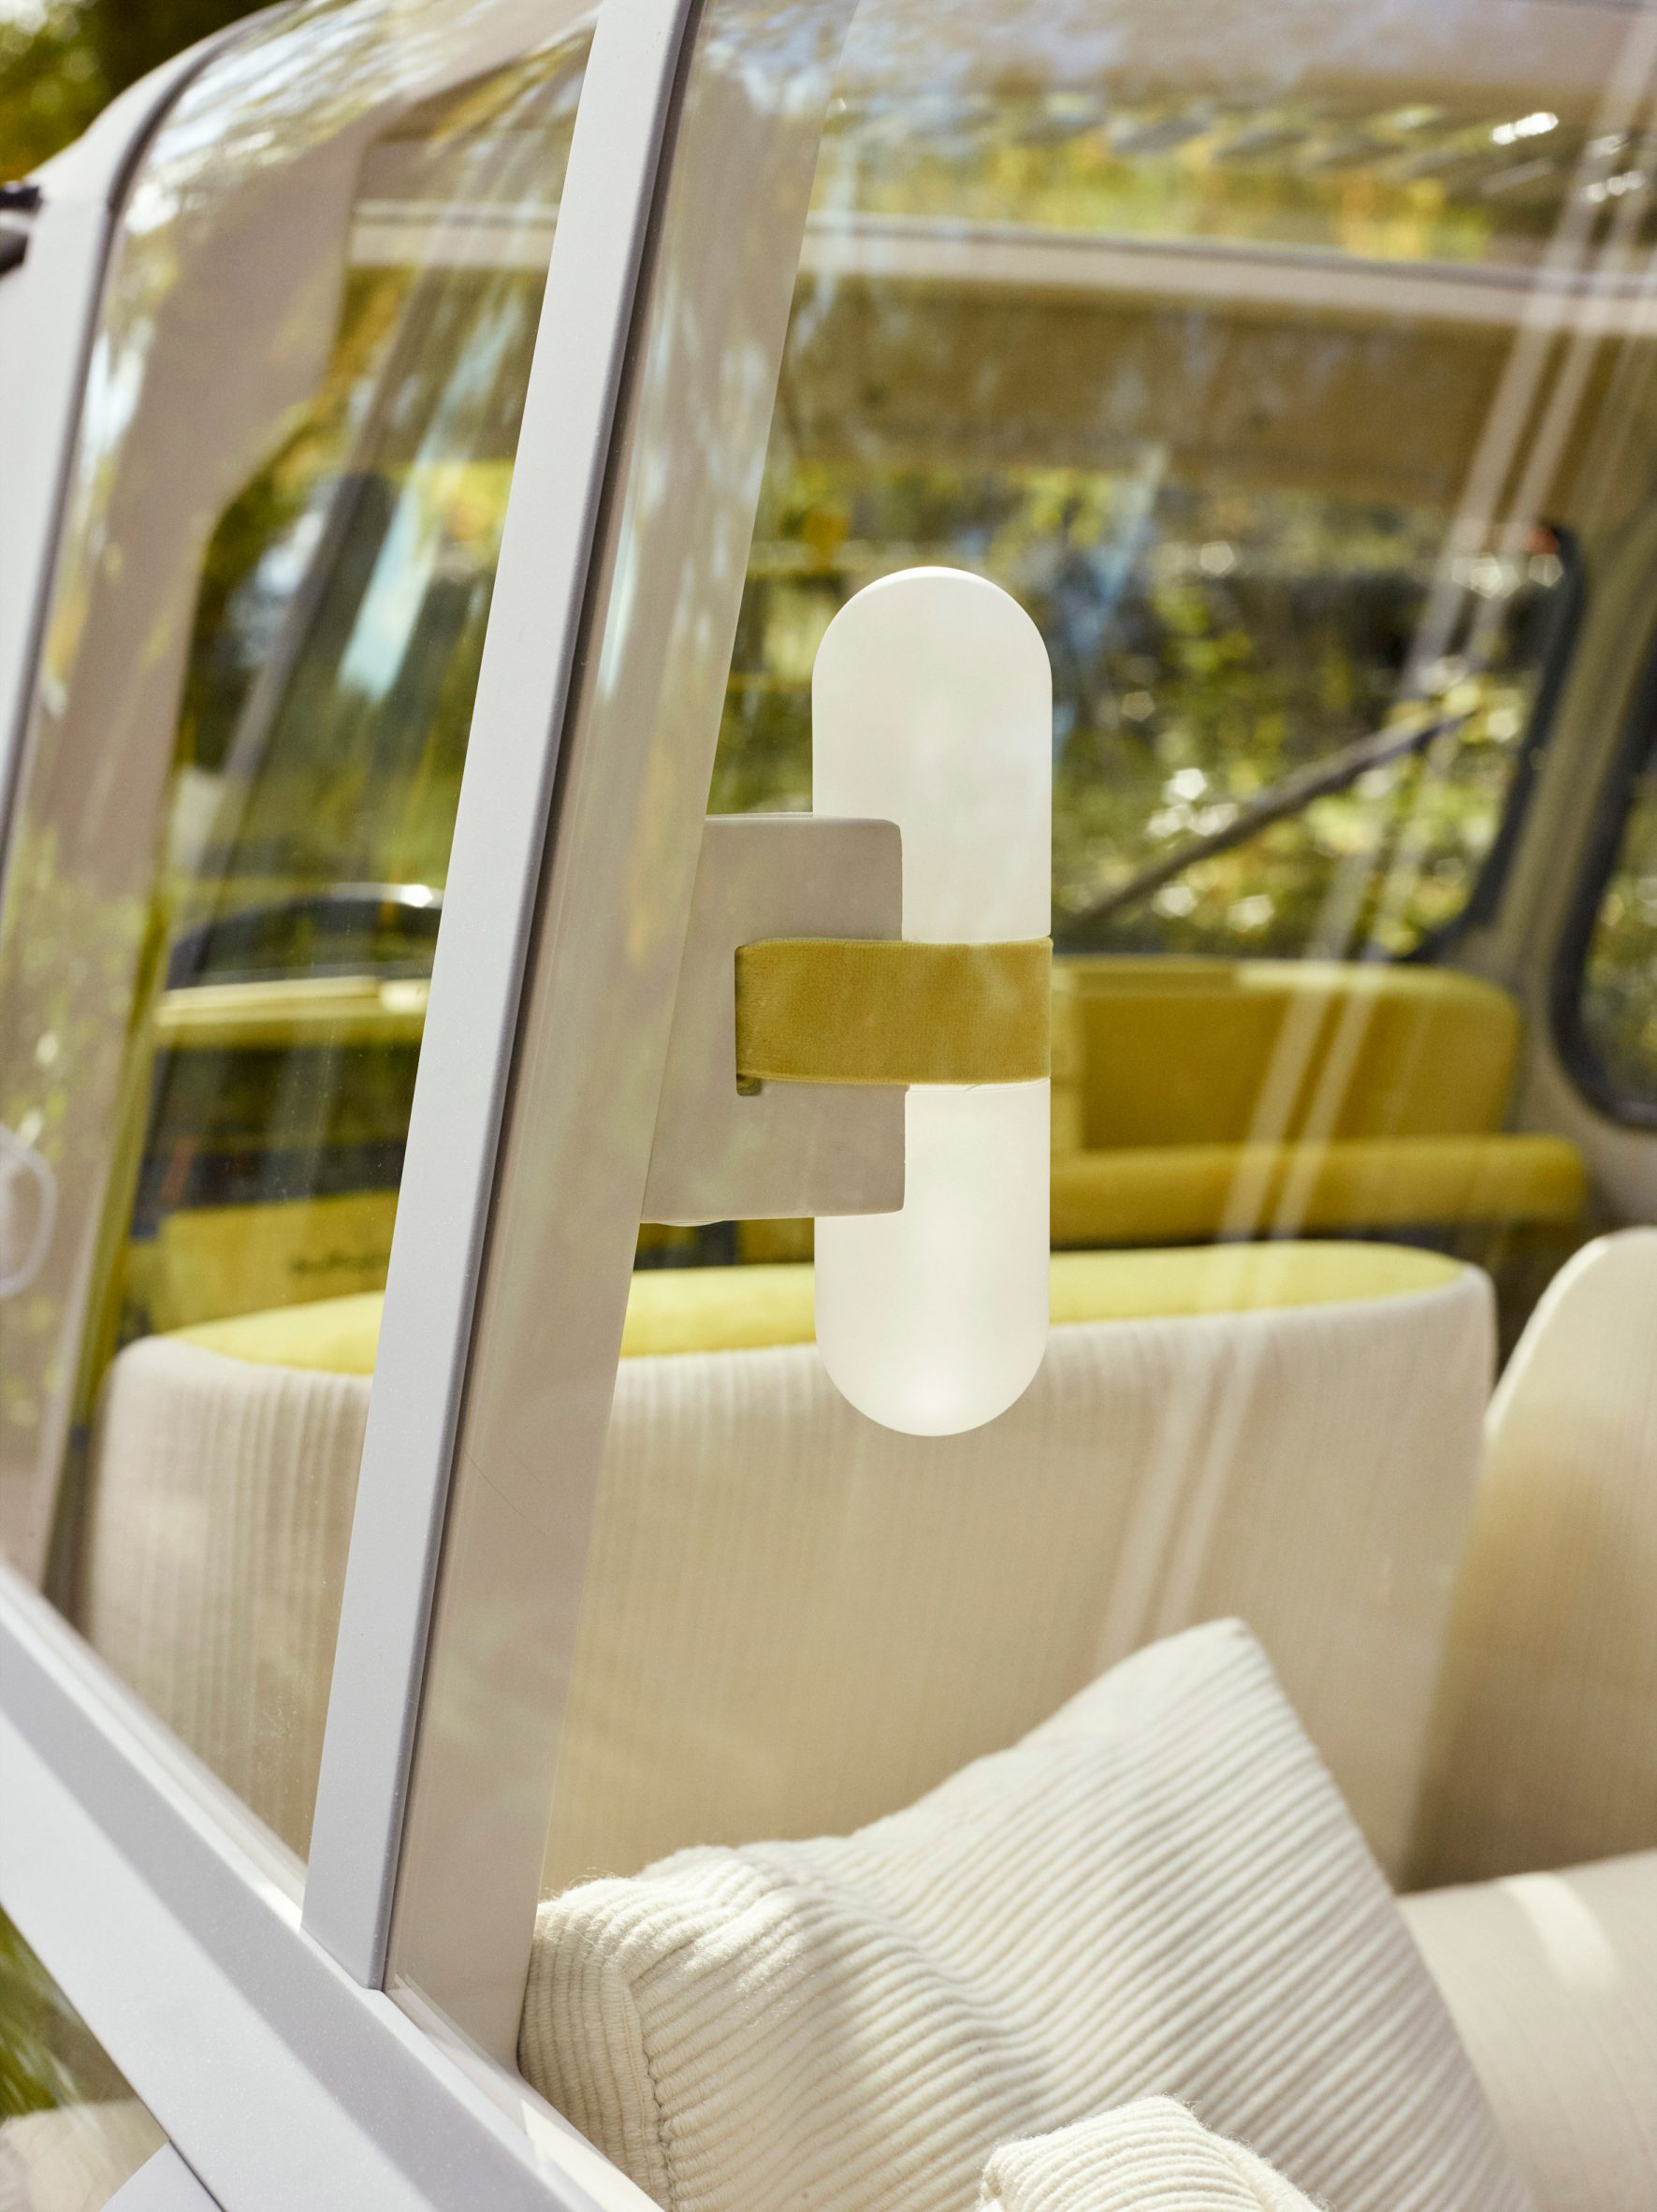 View through the rear windows of the concept car showing cream-coloured cushions and a capsule-shaped wall light